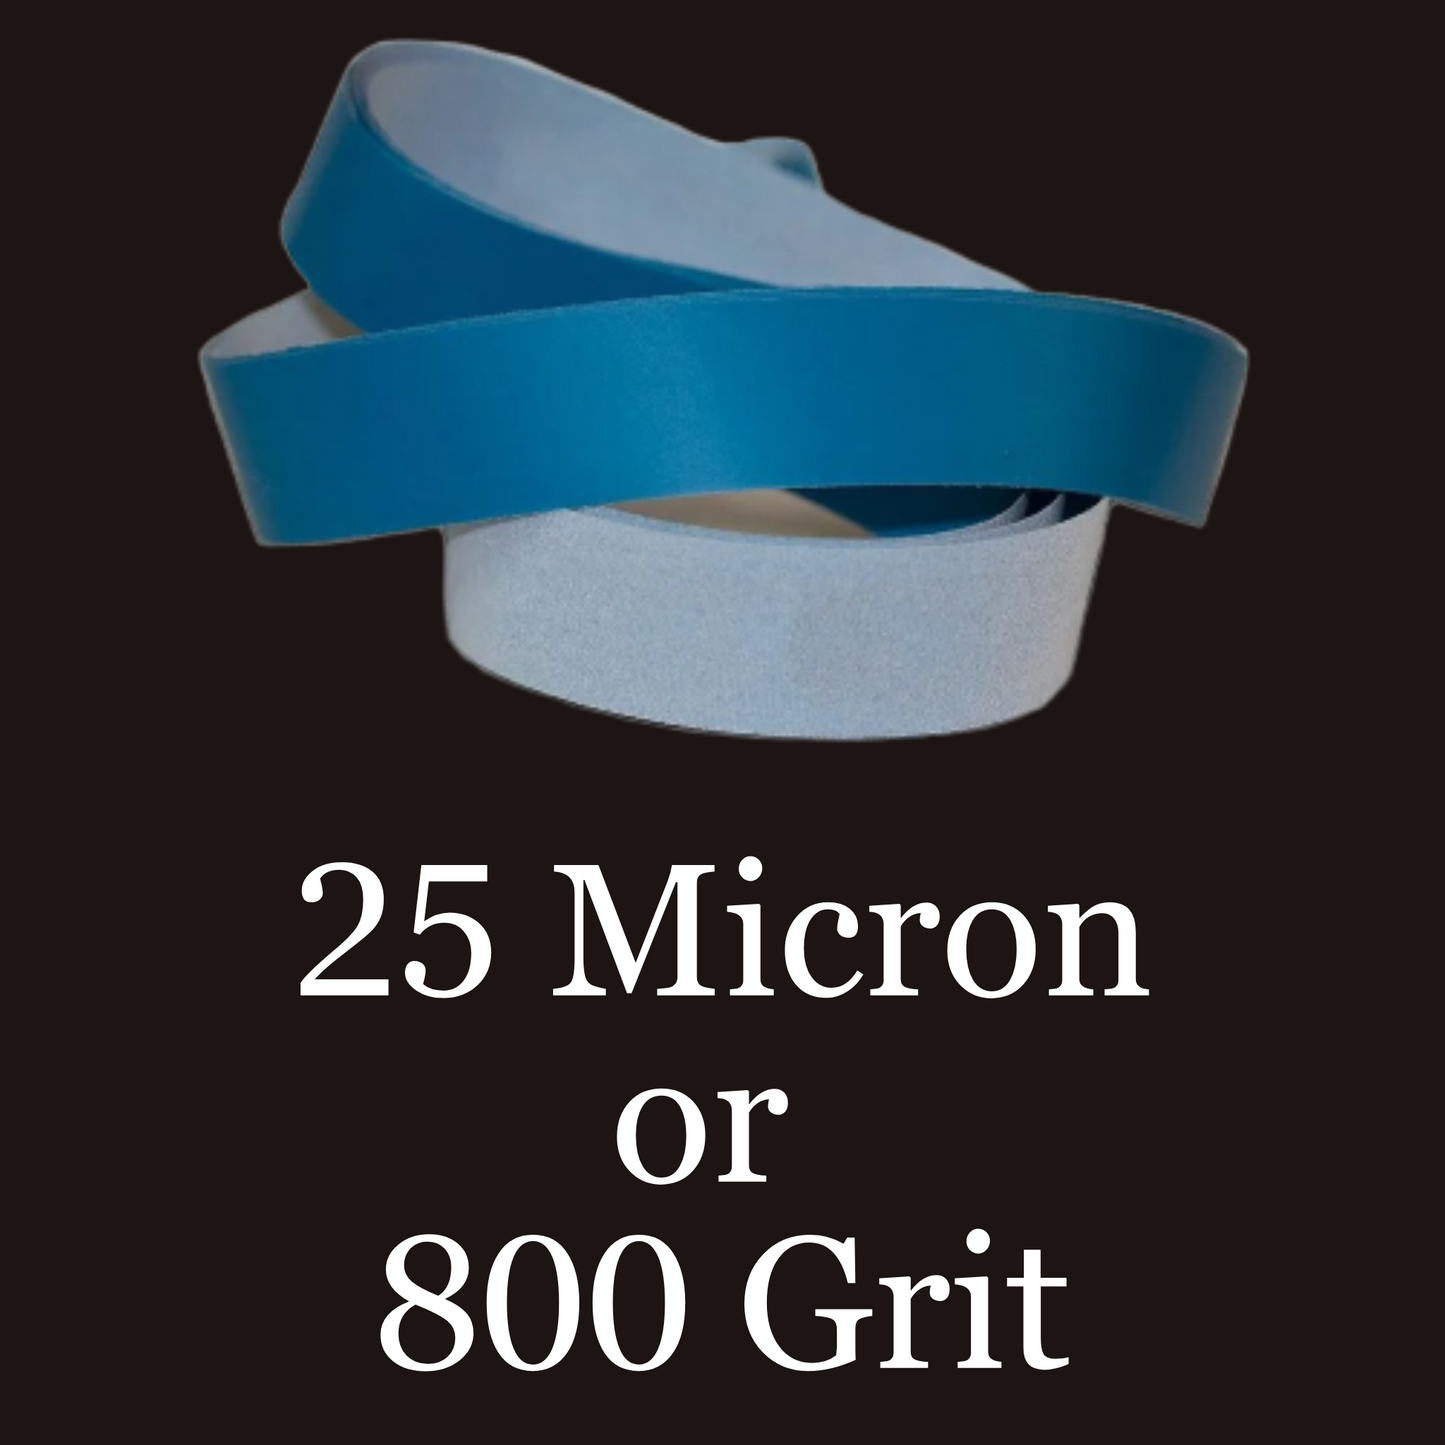 2” x 72” Film Micron Graded Finishing Belts 25 Micron or 800 Grit